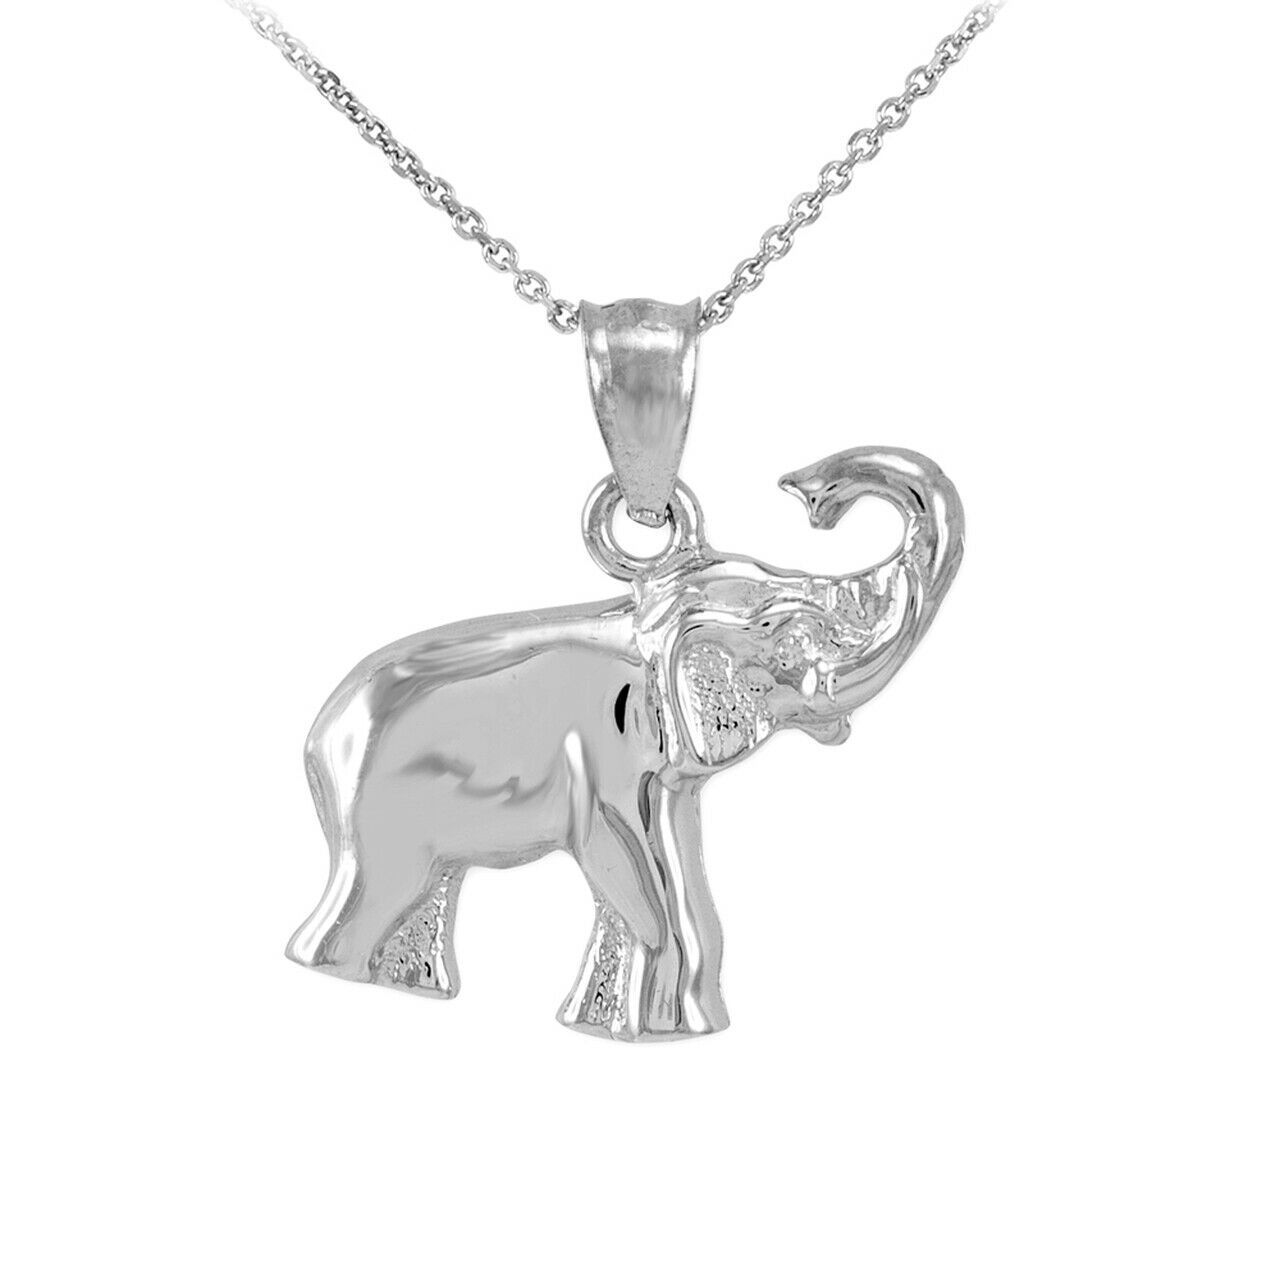 925 Sterling Silver Elephant Pendant Necklace Charm Made in US 16" 18" 20" 22"